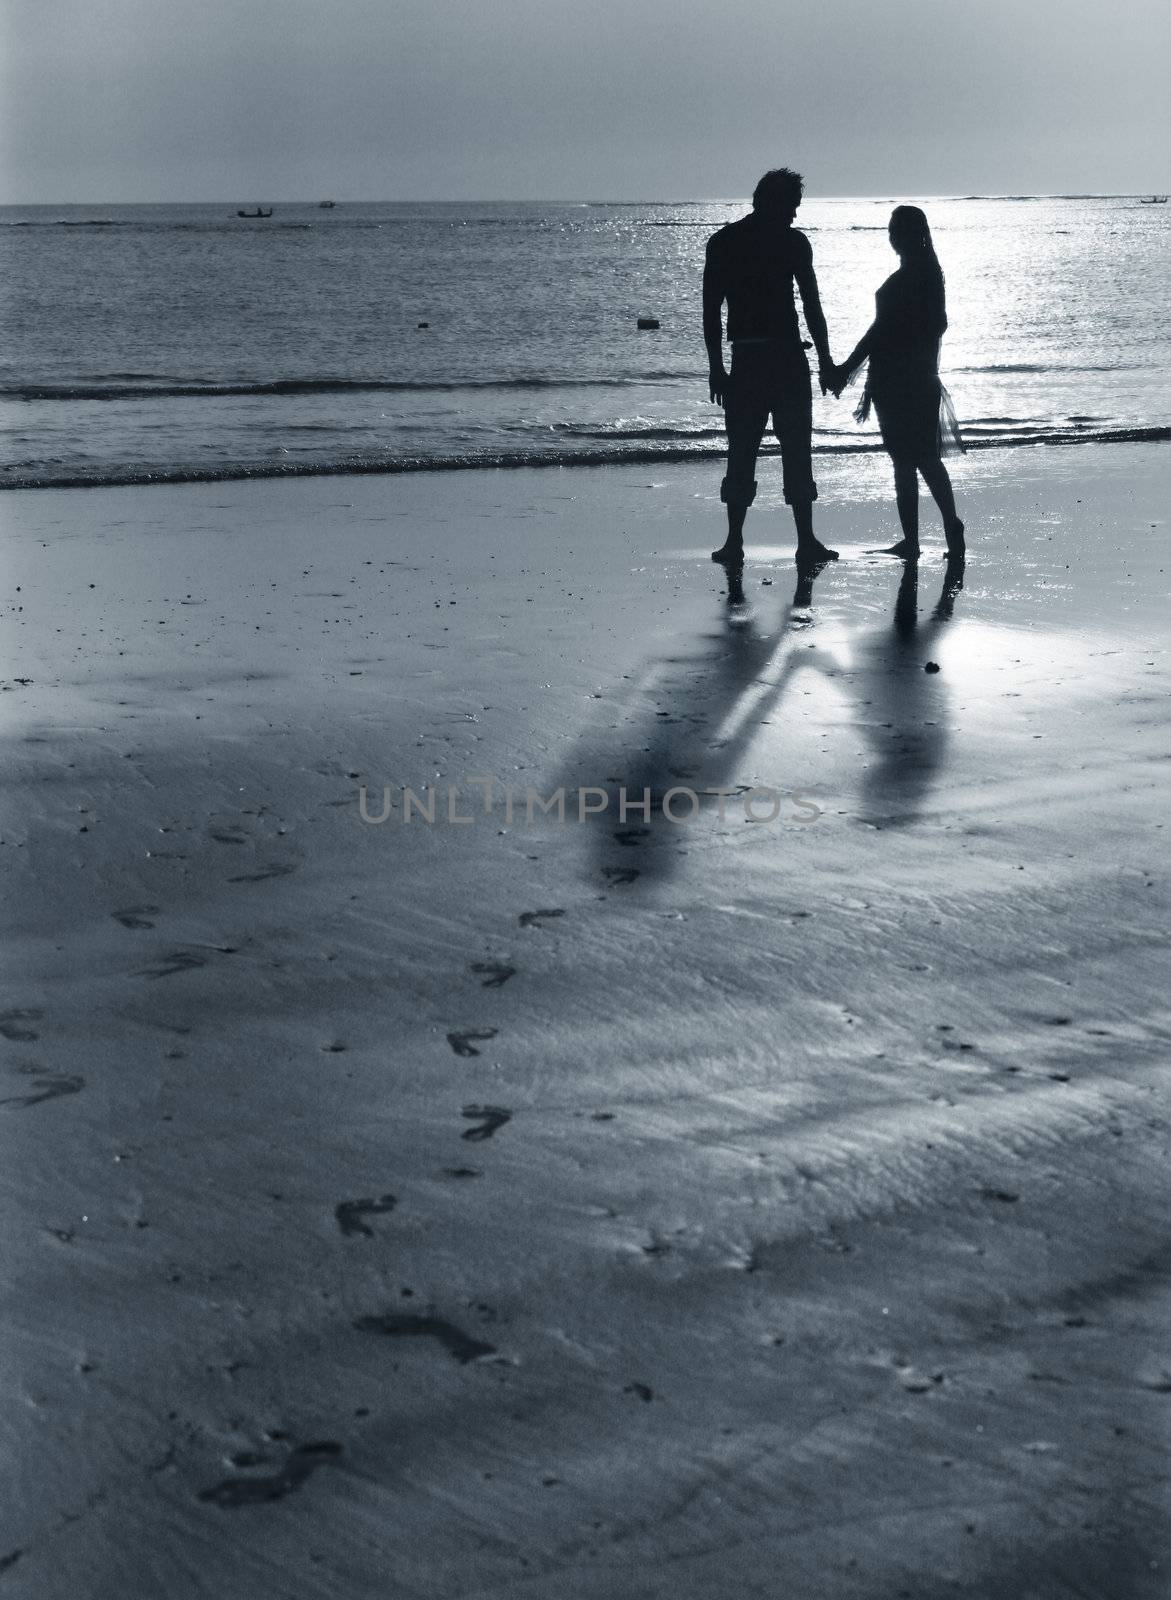 Couple on sunset. Coast of the Indian ocean